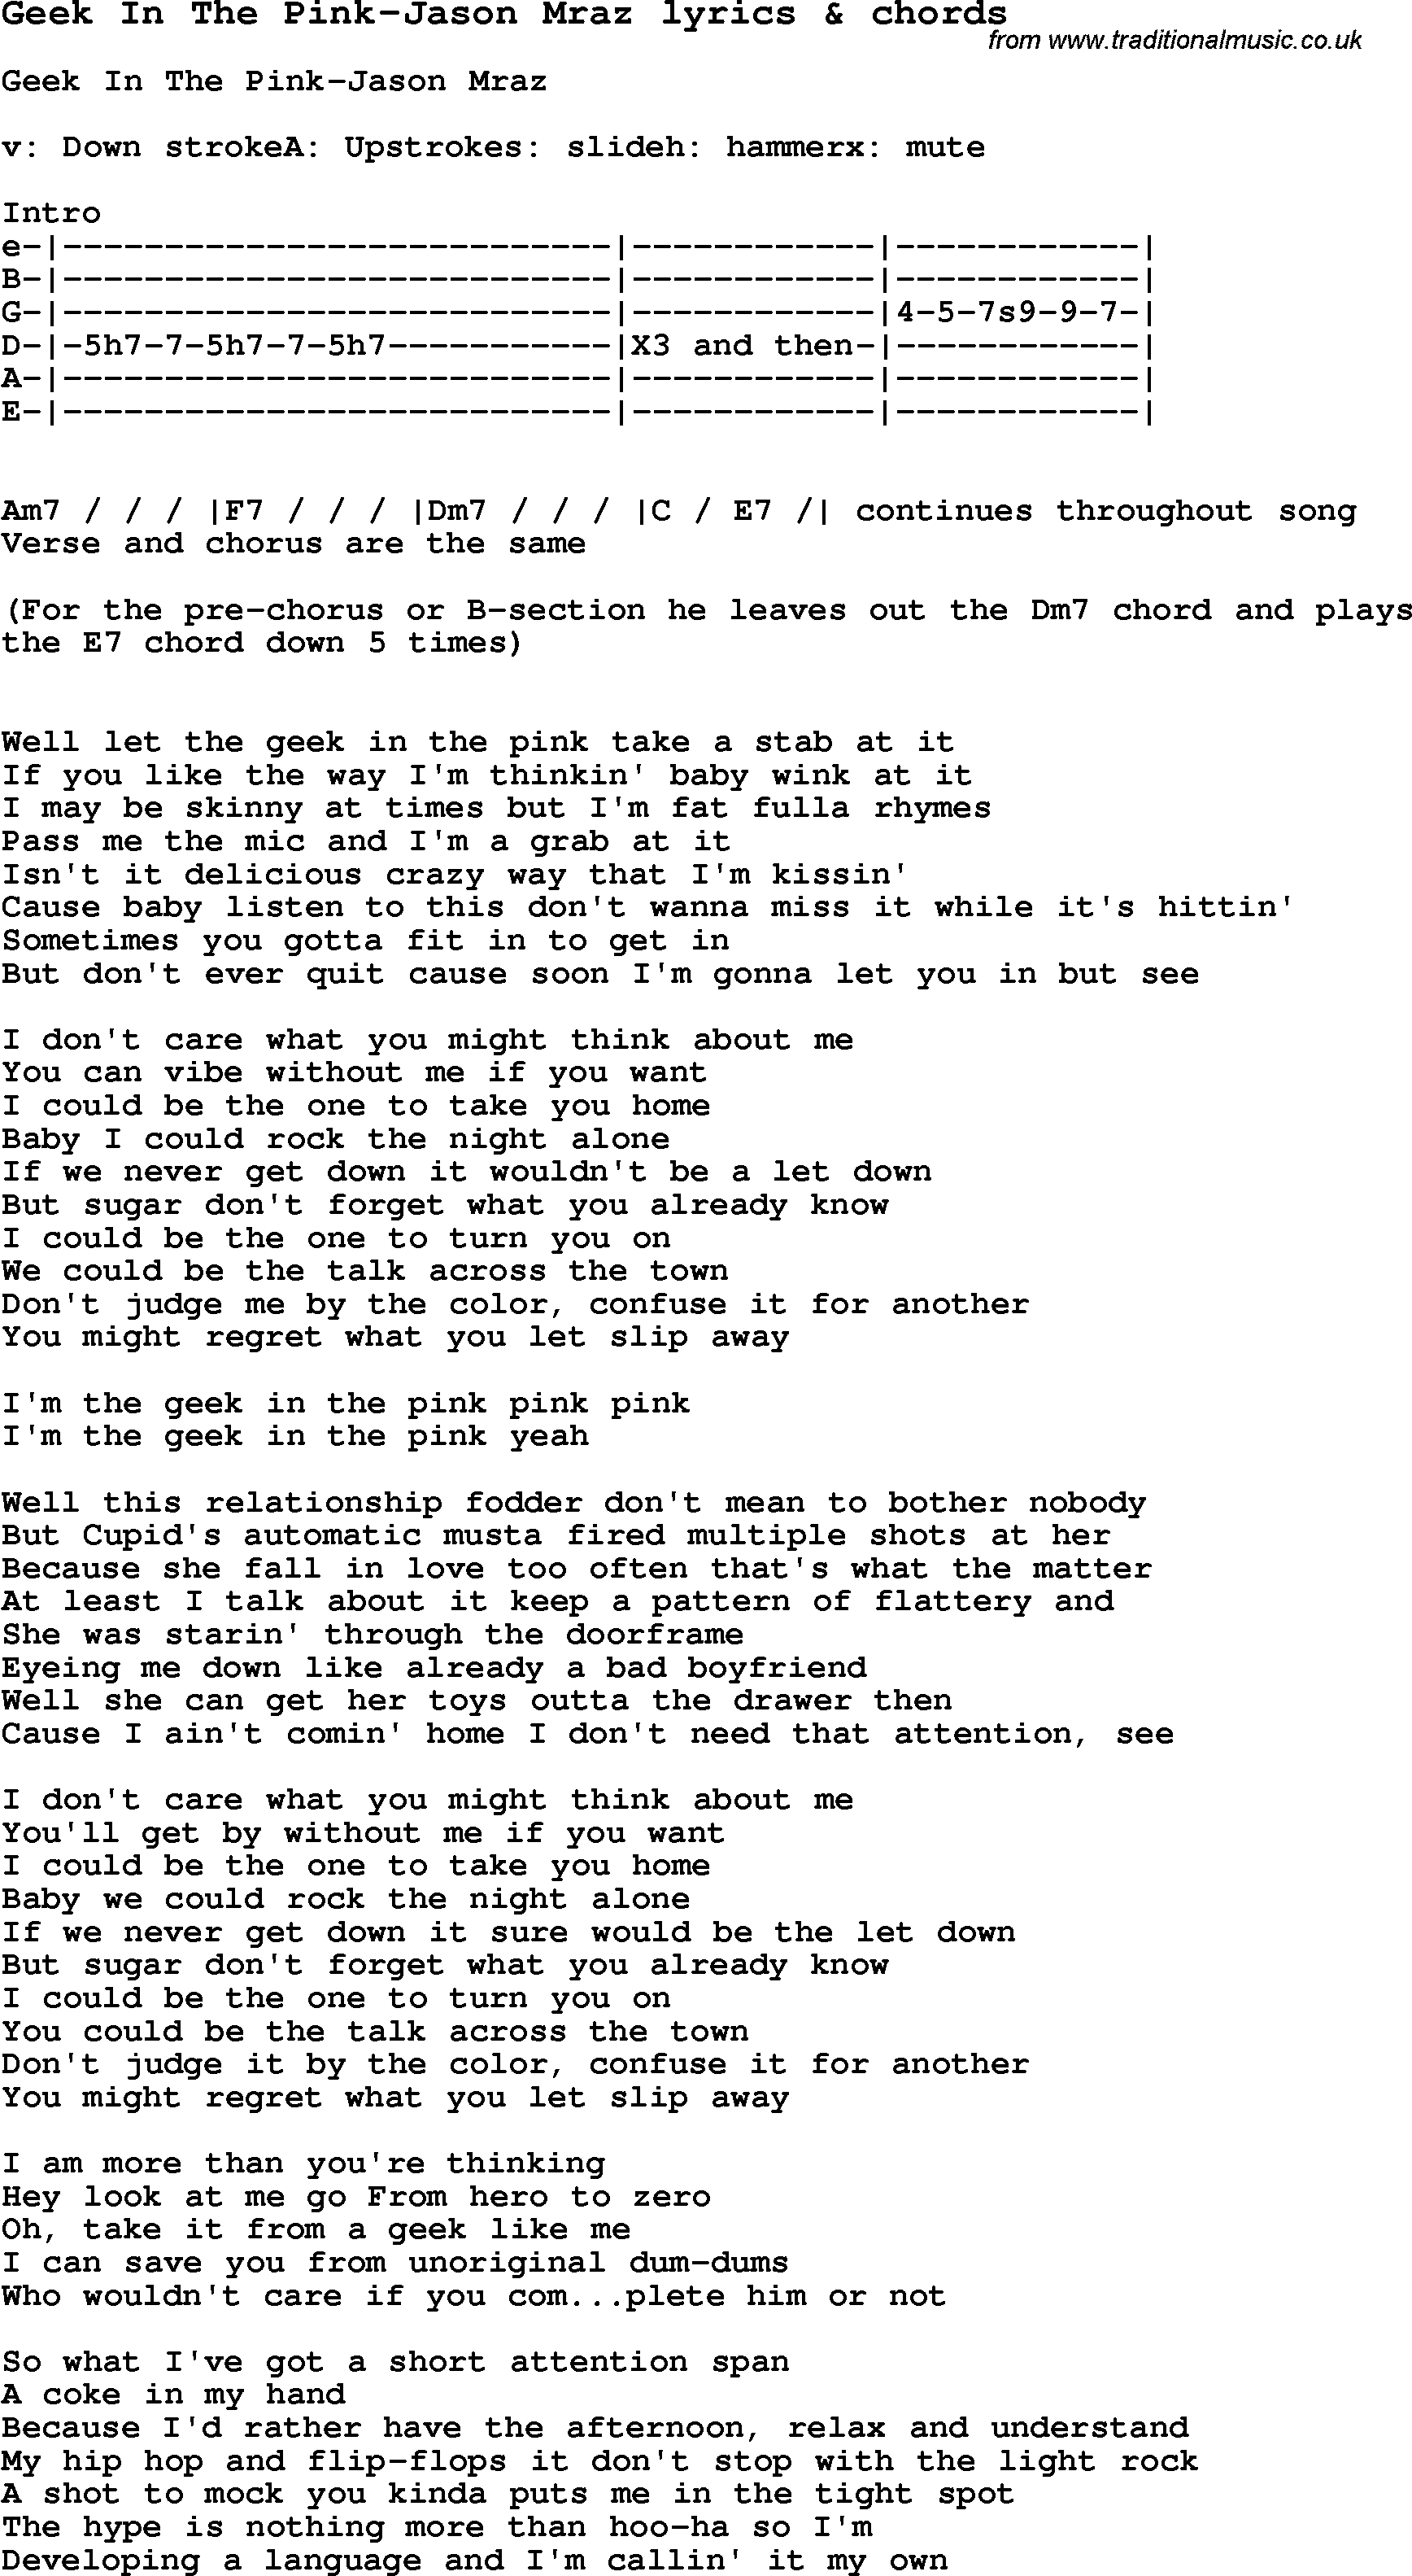 Love Song Lyrics for: Geek In The Pink-Jason Mraz with chords for ...